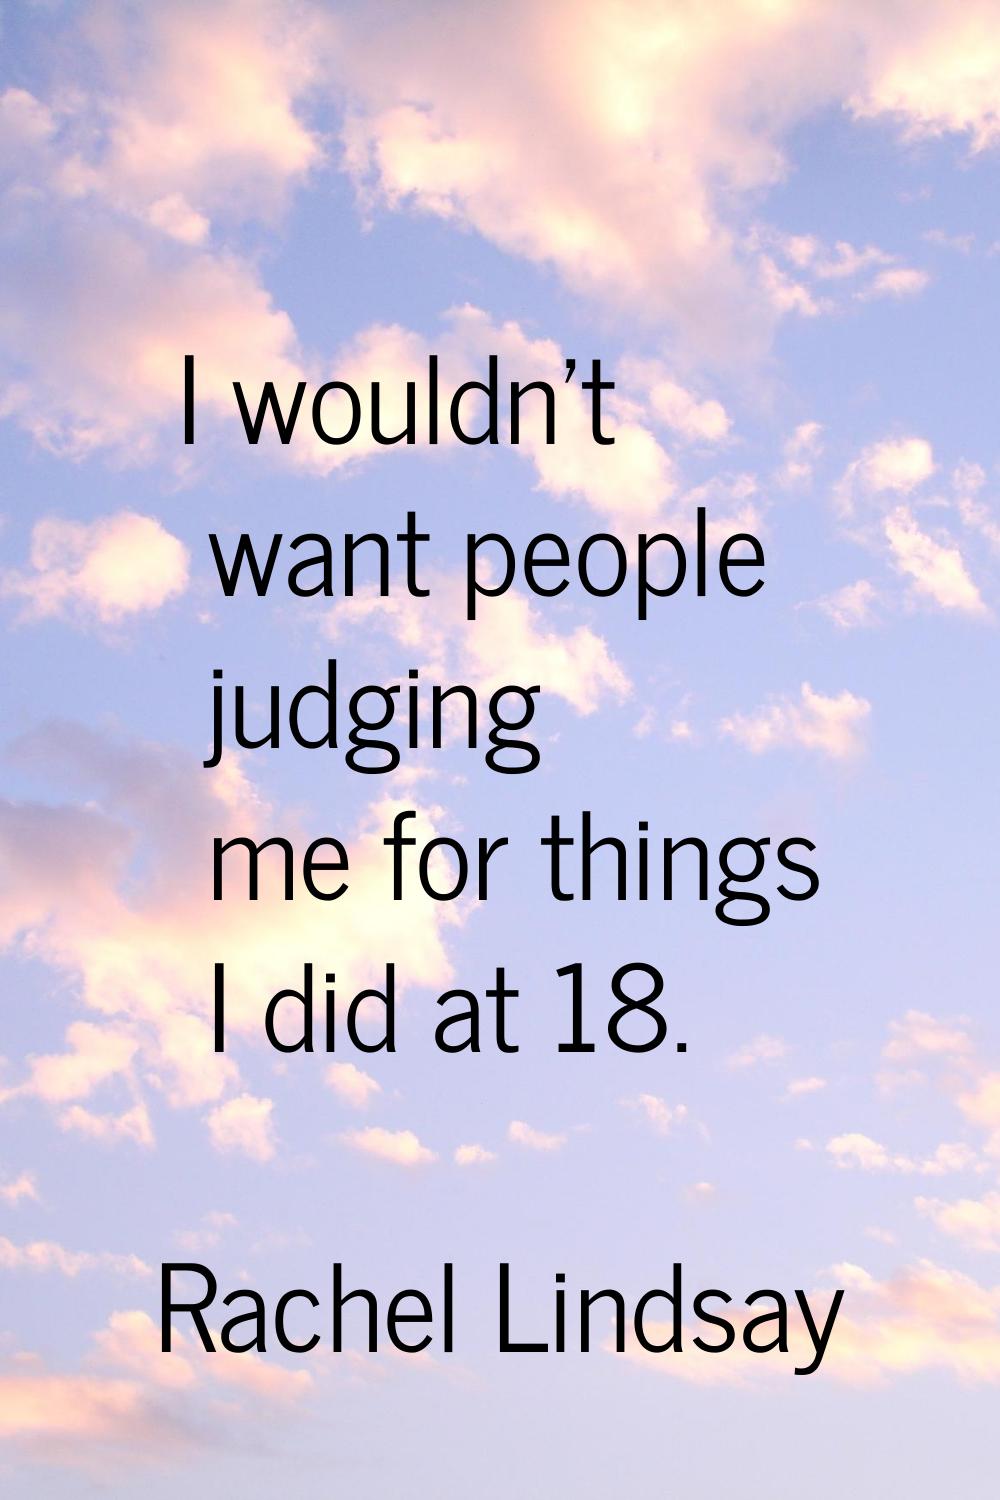 I wouldn't want people judging me for things I did at 18.